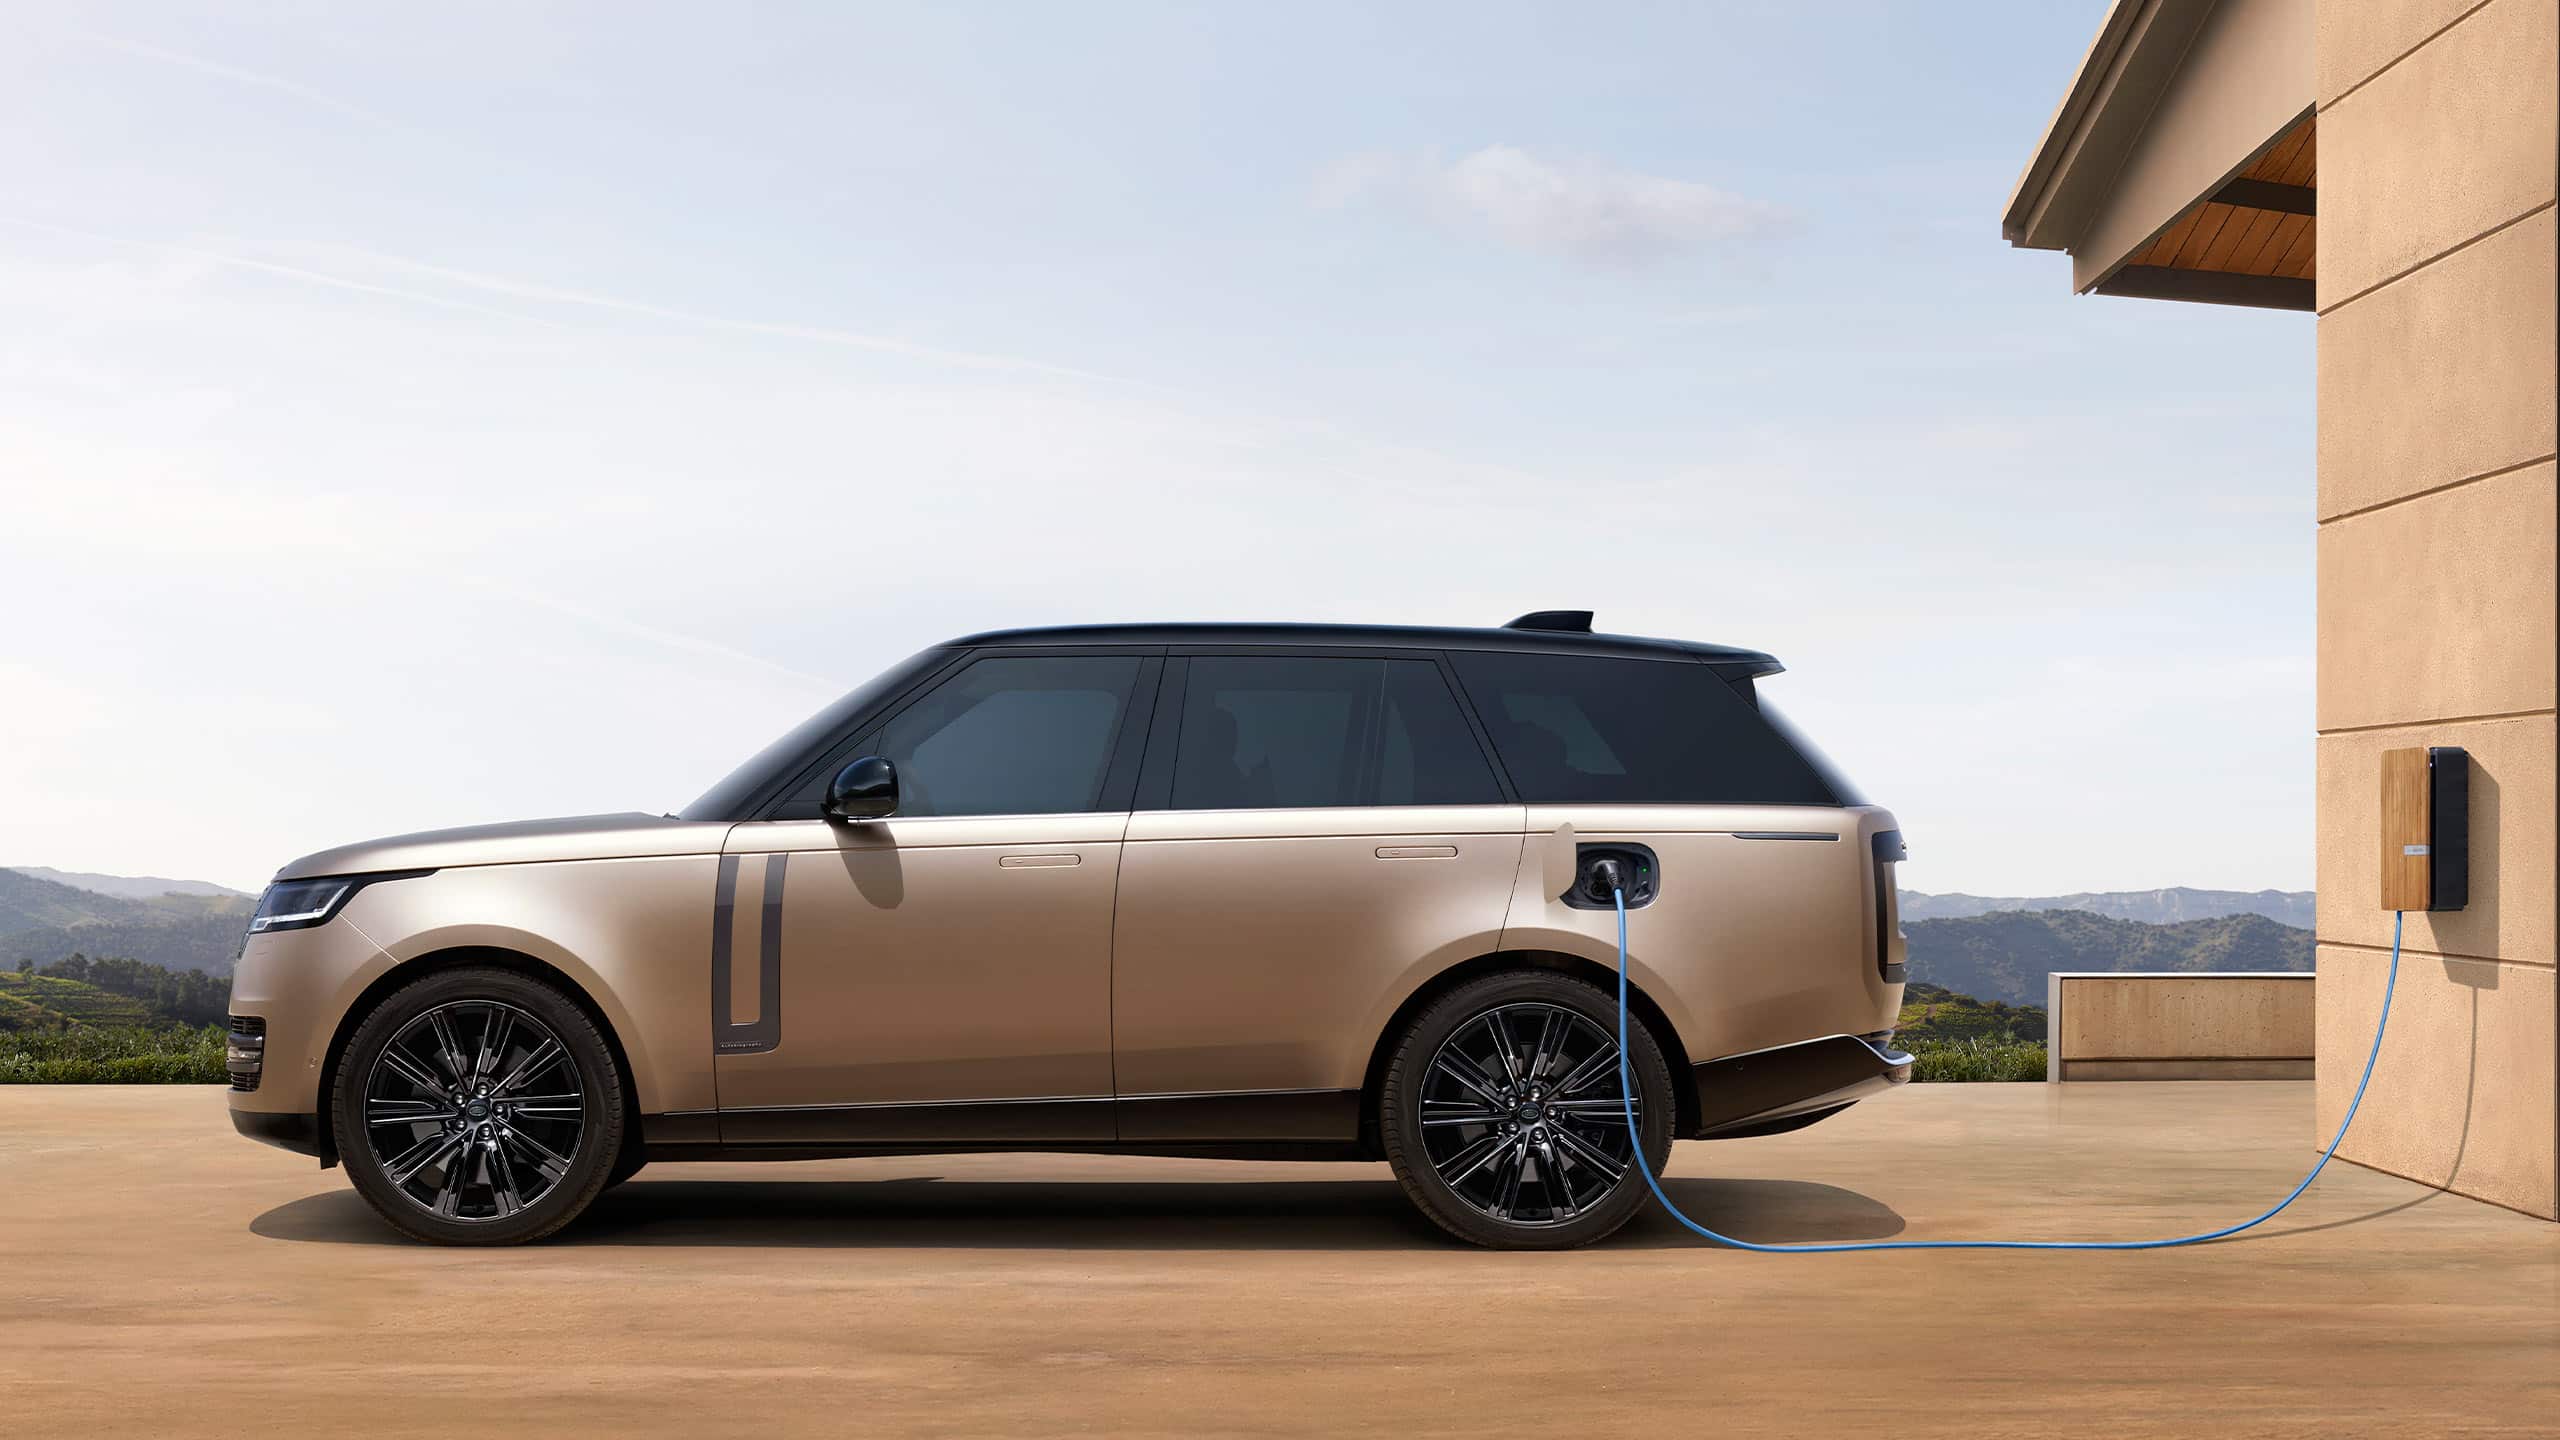 New Range Rover plugged in side view